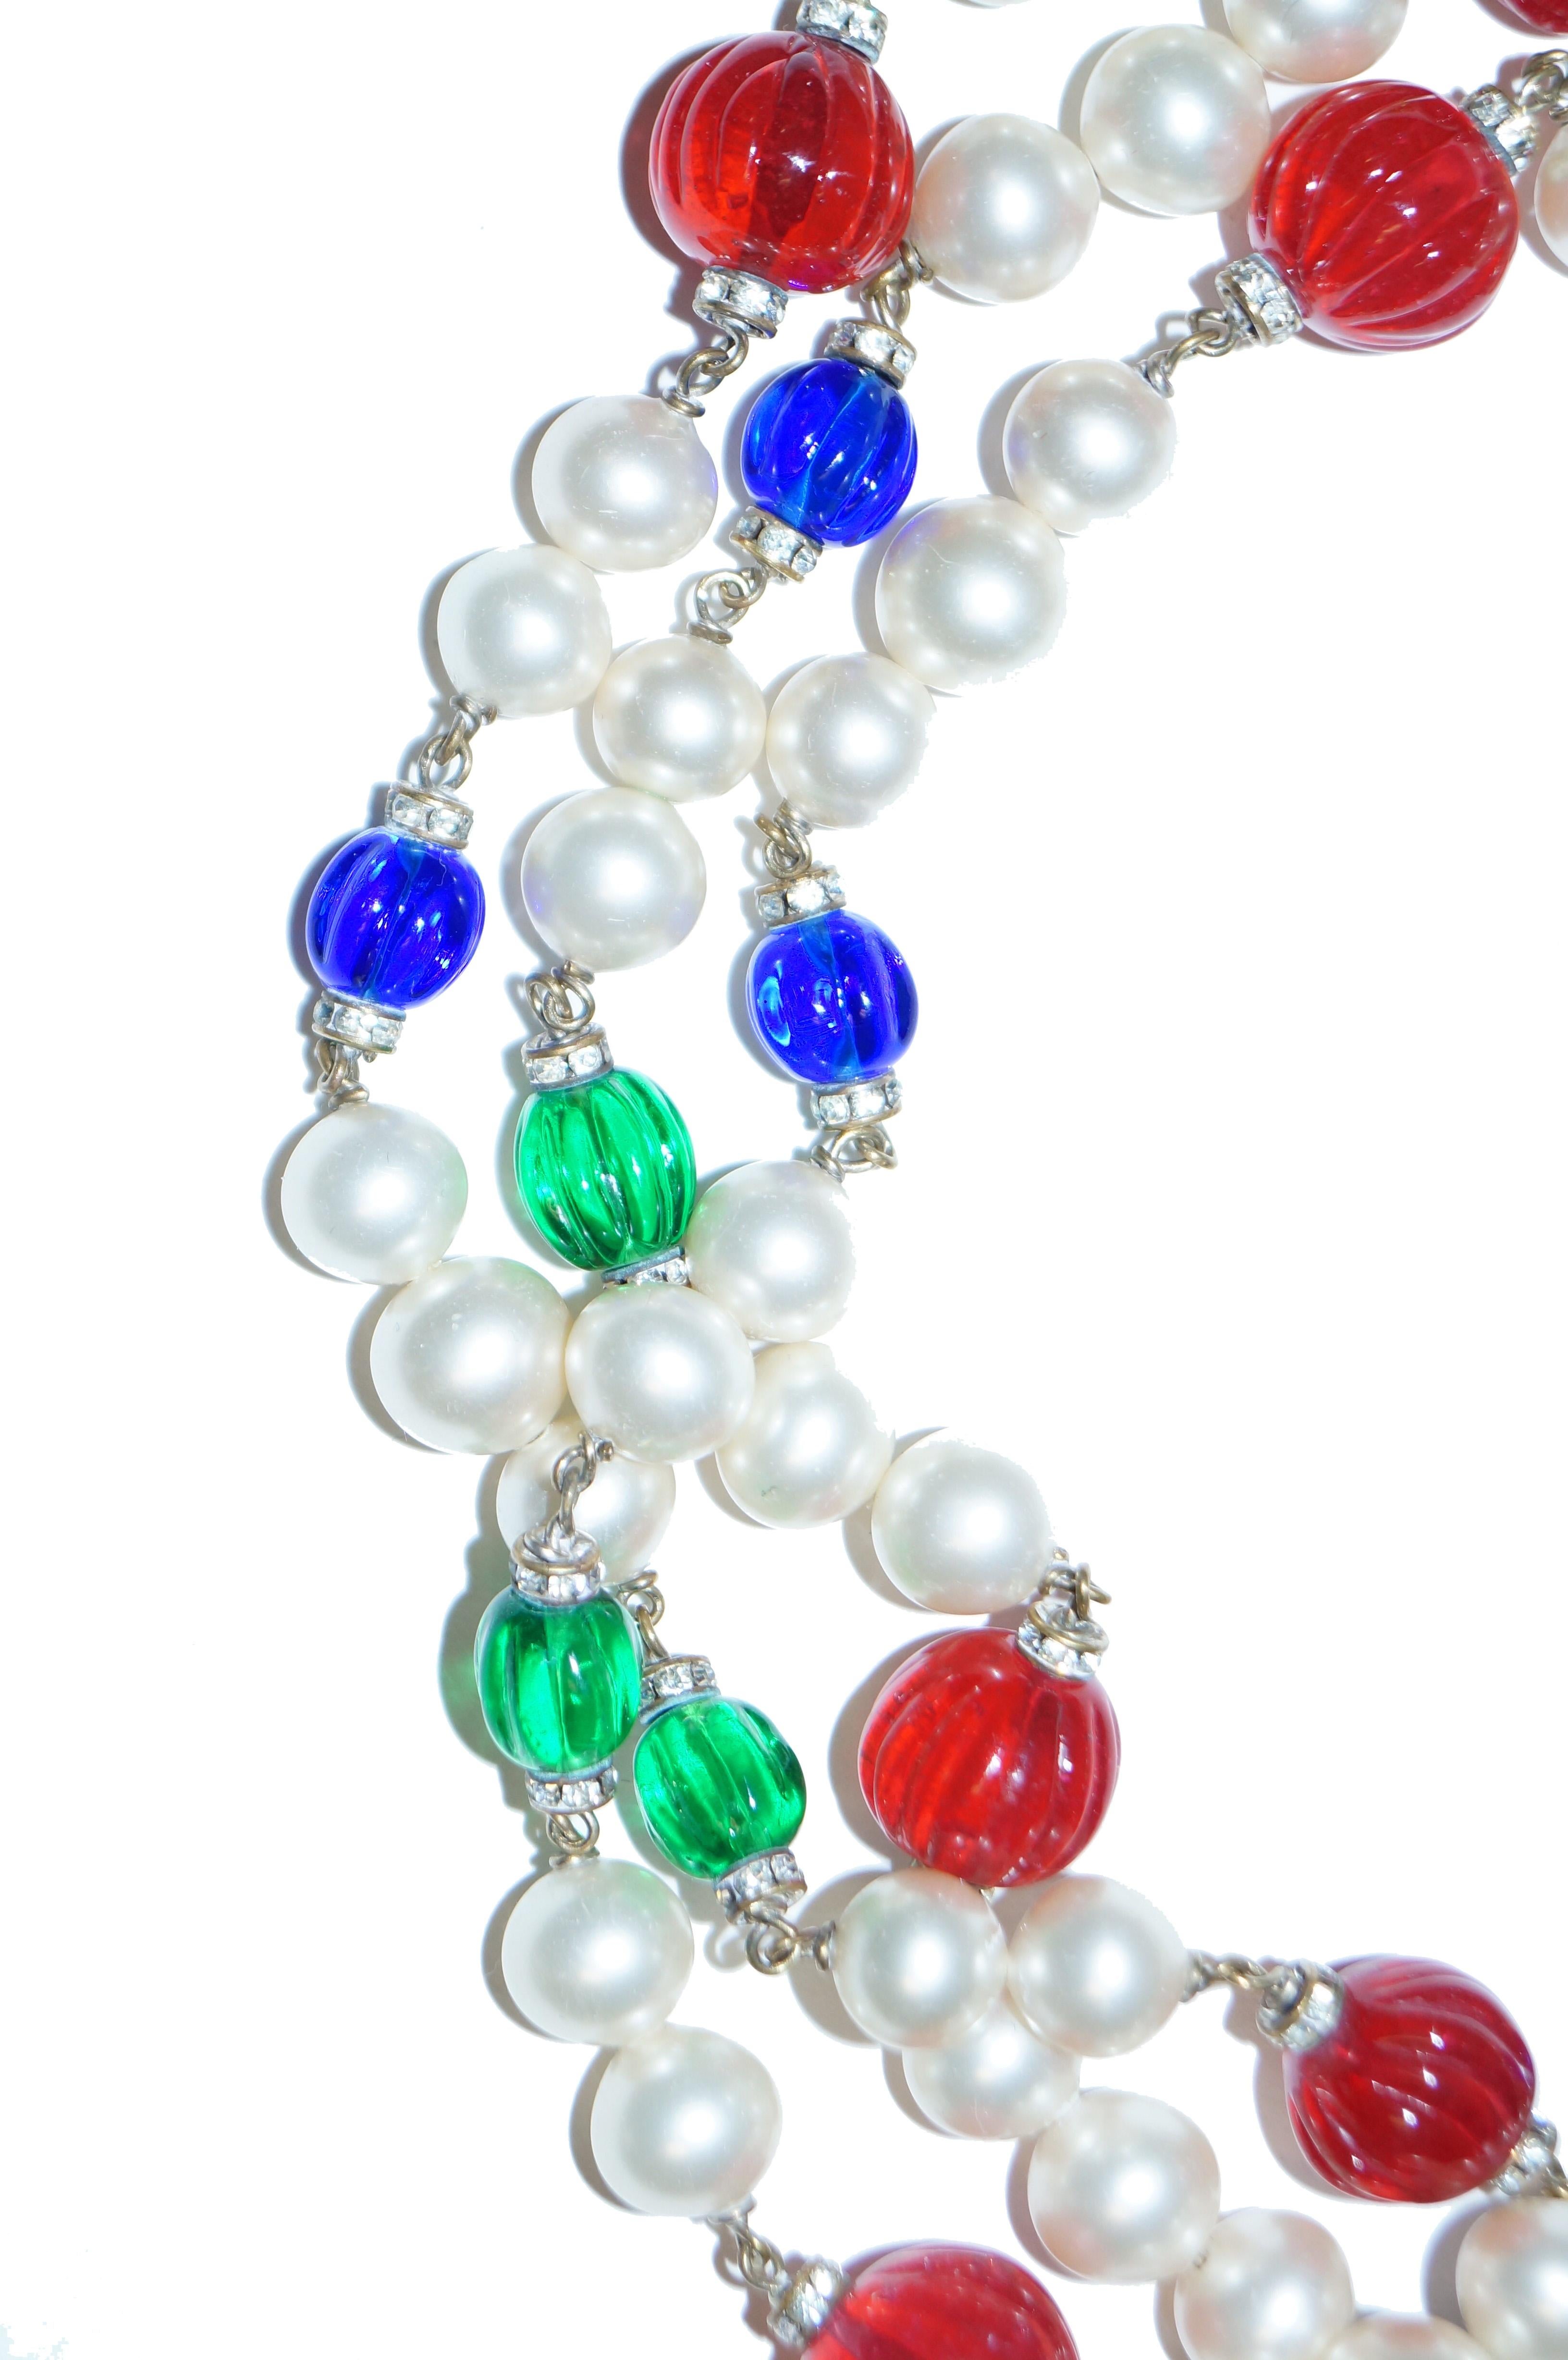 Opera length faux pearl and pate de verre Gripoix glass necklace. This Chanel piece features a pearl strand of beads with brilliant translucent candy - like glass beads in poppy red, royal blue, and kelly green. 

The necklace is unmarked as were